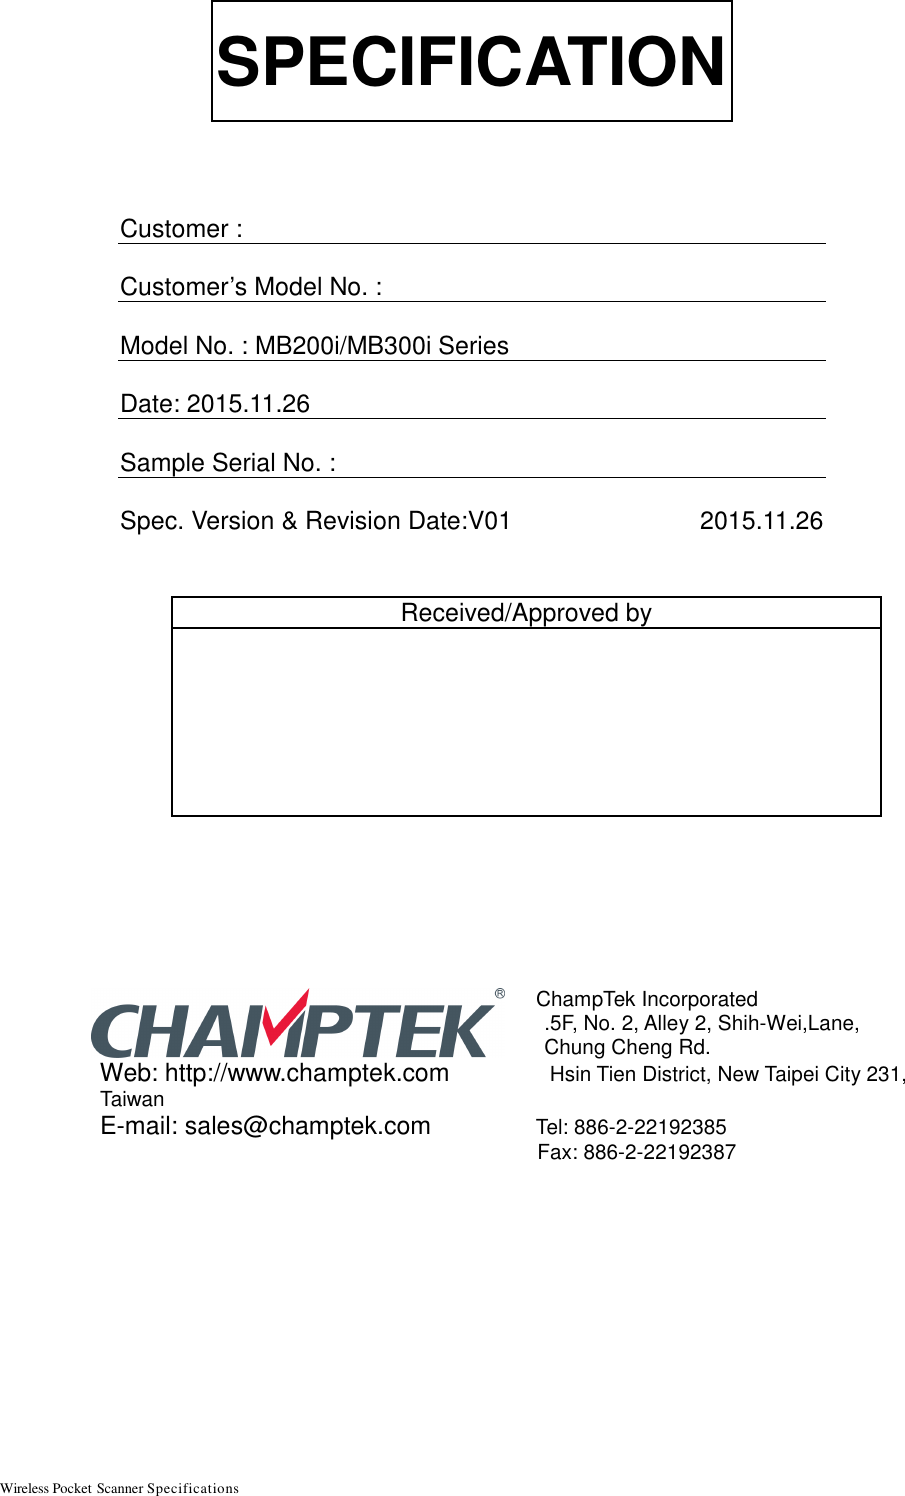 Wireless Pocket Scanner Specifications                                                         SPECIFICATION    Customer :  Customer’s Model No. :    Model No. : MB200i/MB300i Series  Date: 2015.11.26  Sample Serial No. :   Spec. Version &amp; Revision Date:V01                           2015.11.26                   ChampTek Incorporated  .5F, No. 2, Alley 2, Shih-Wei,Lane,    Chung Cheng Rd. Web: http://www.champtek.com   Hsin Tien District, New Taipei City 231, Taiwan E-mail: sales@champtek.com   Tel: 886-2-22192385     Fax: 886-2-22192387     Received/Approved by  